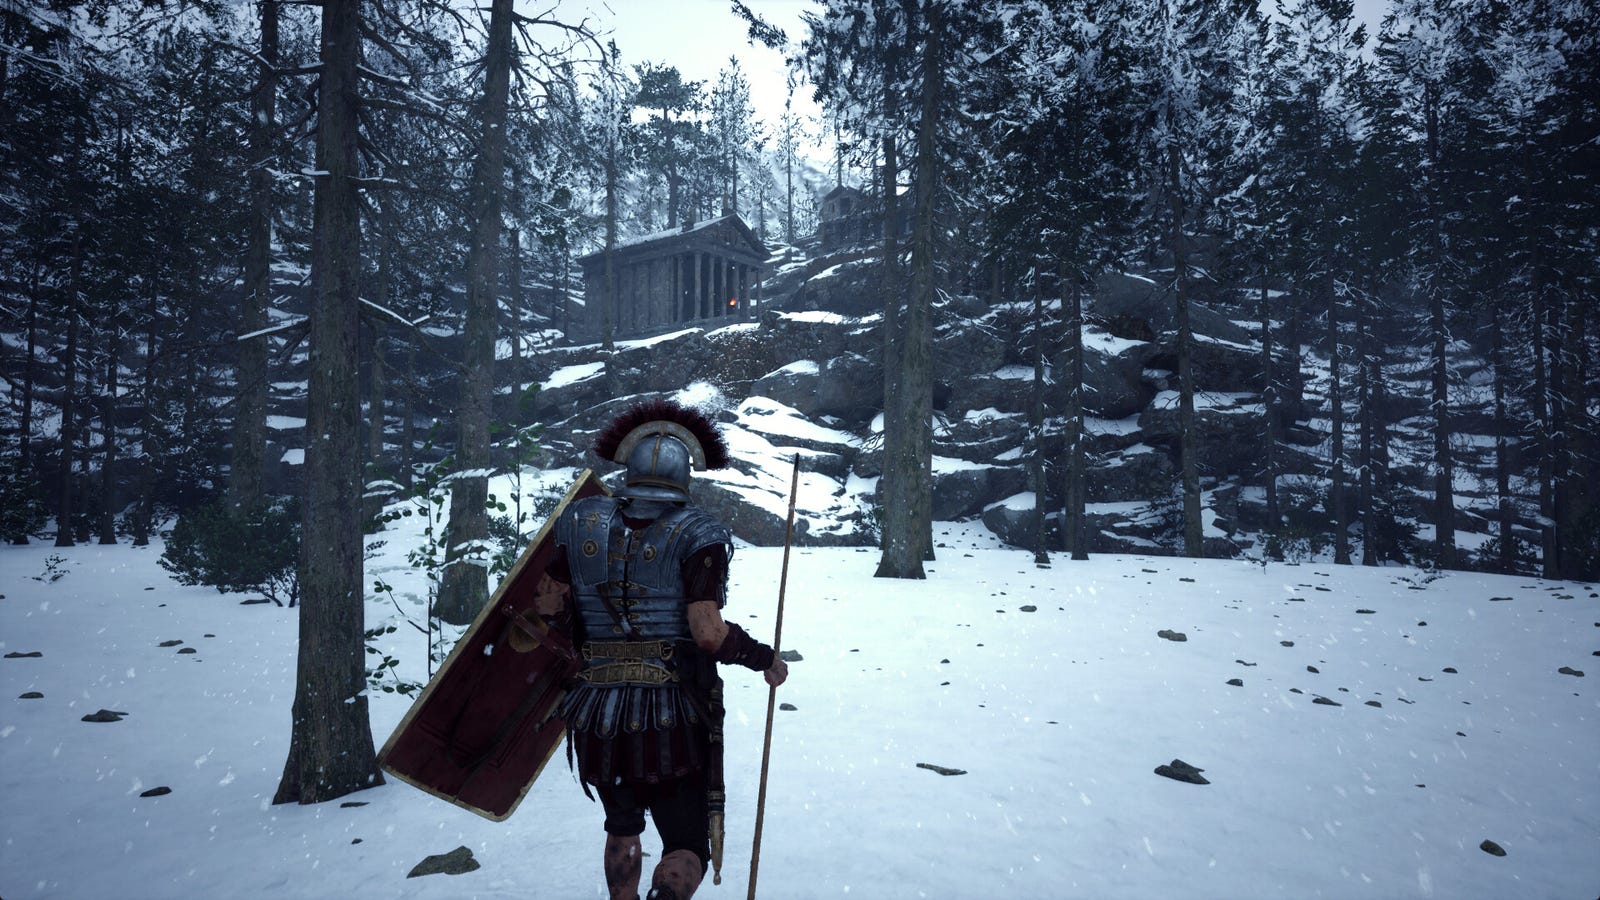 In new open world game Lost Legions you are a Roman "rebuilding the empire" behind enemy lines